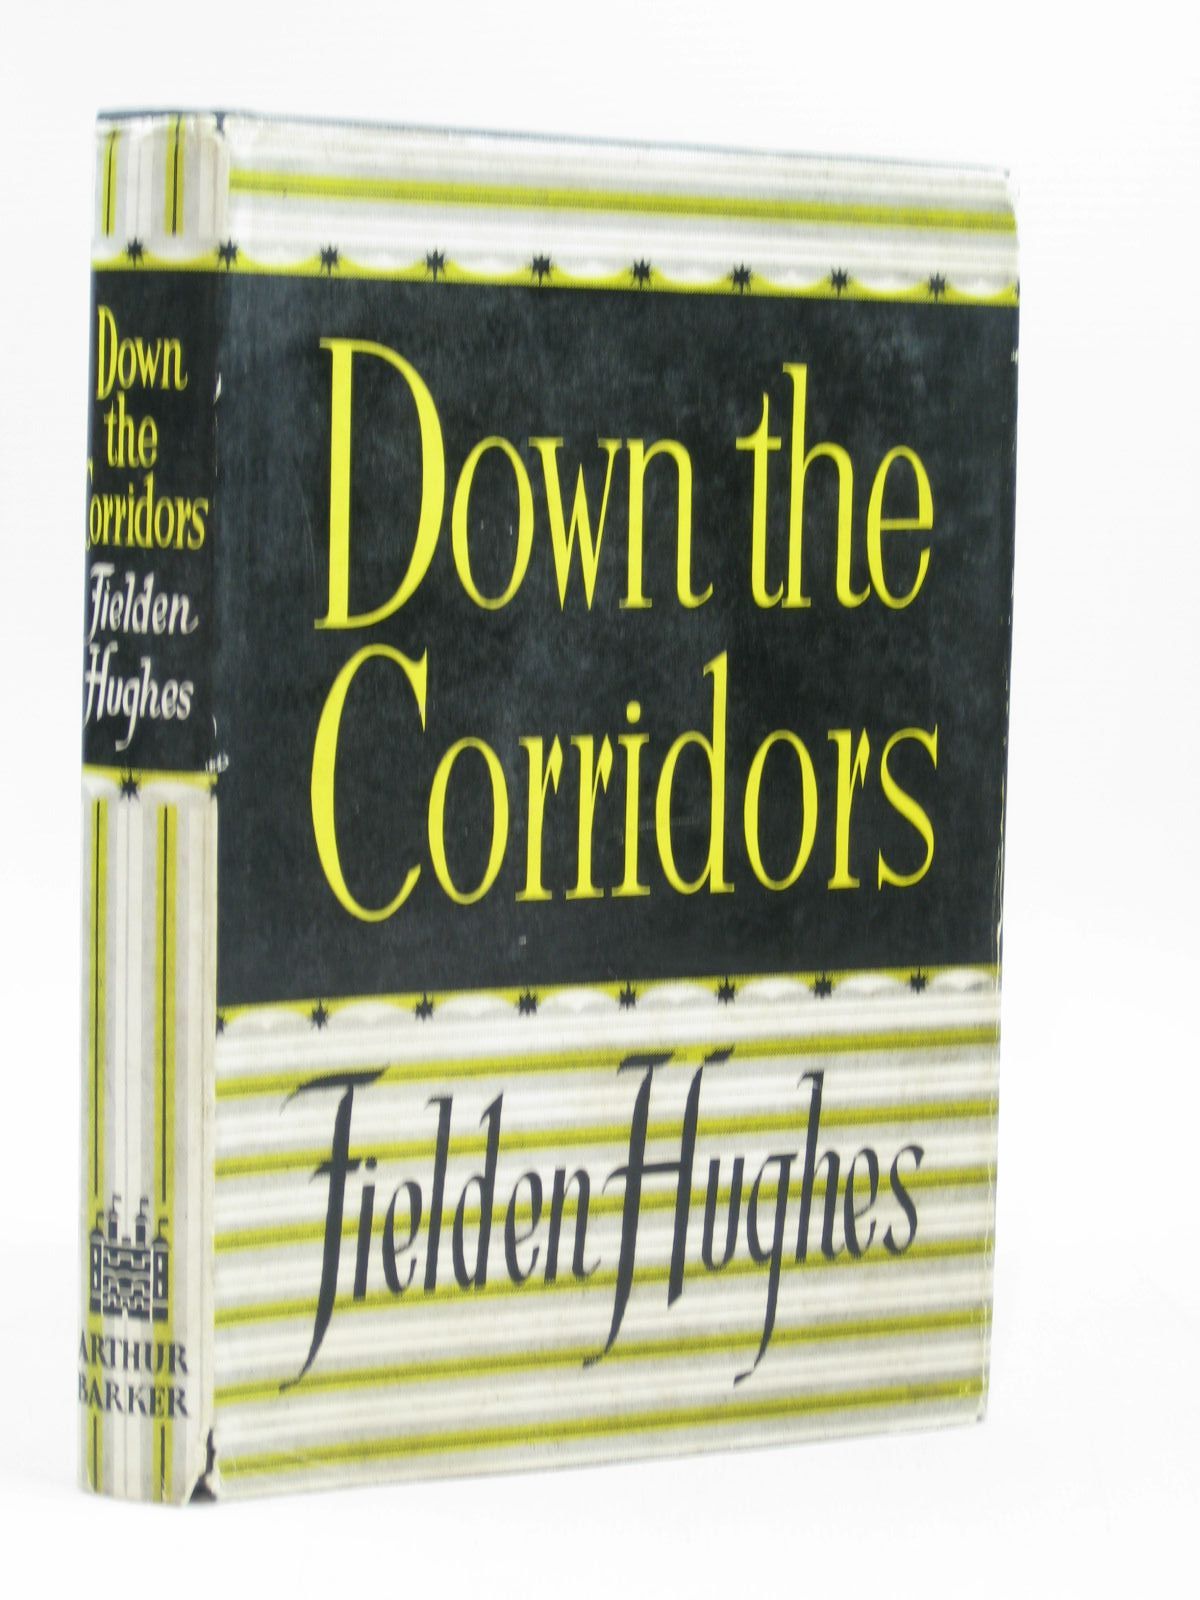 Cover of DOWN THE CORRIDORS by Fielden Hughes